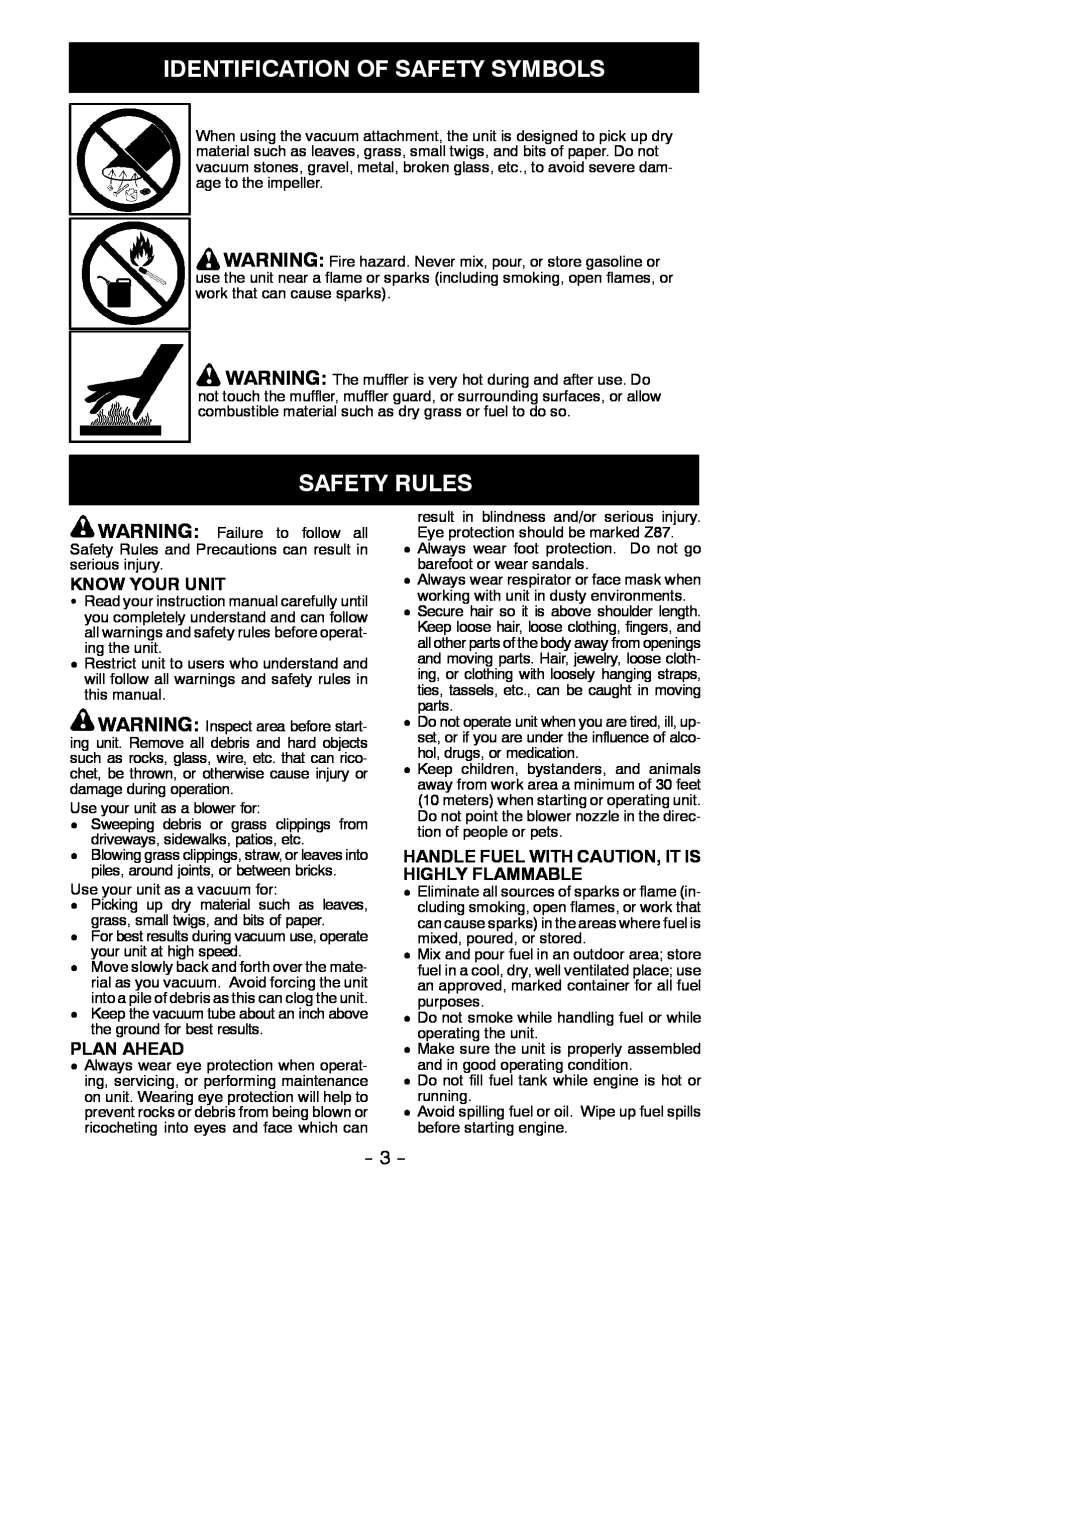 Poulan 545186830, SM210VS instruction manual Safety Rules, Identification Of Safety Symbols, Know Your Unit, Plan Ahead 